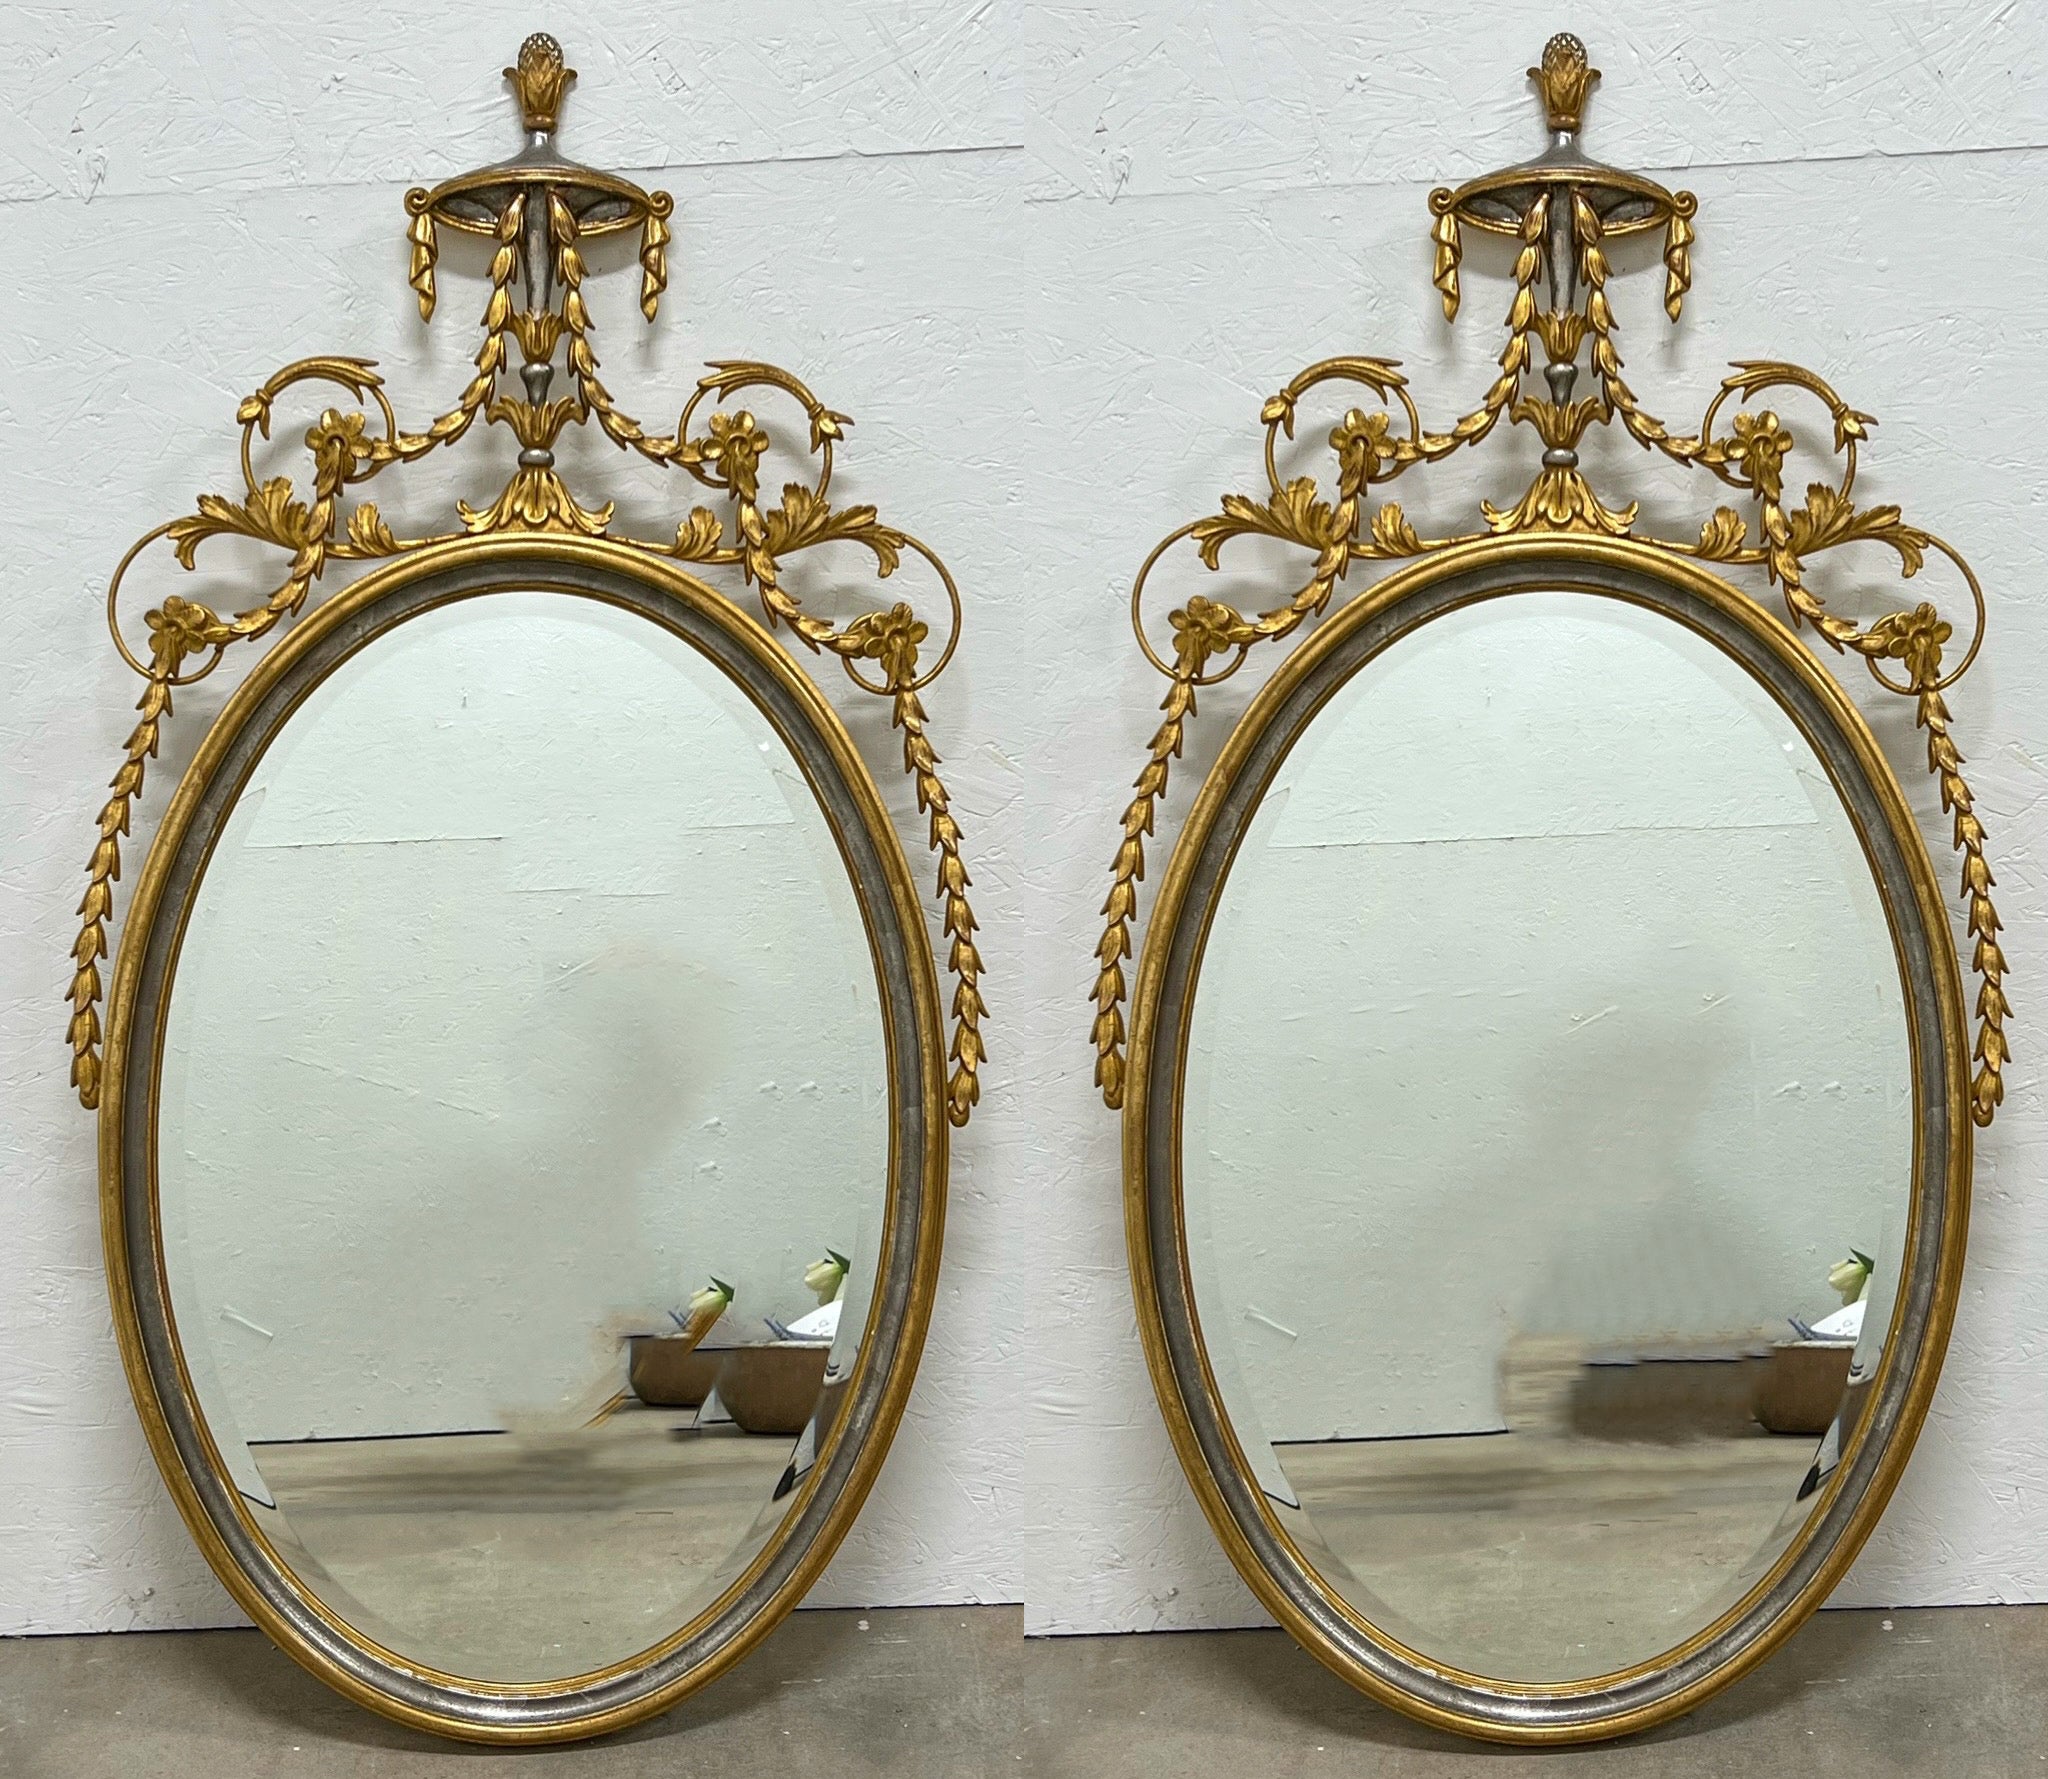 These are timeless! It is a pair of Adam Style silver and gold gilt carved Italian mirrors attributed to Friedman Brothers. They are in very good condition.